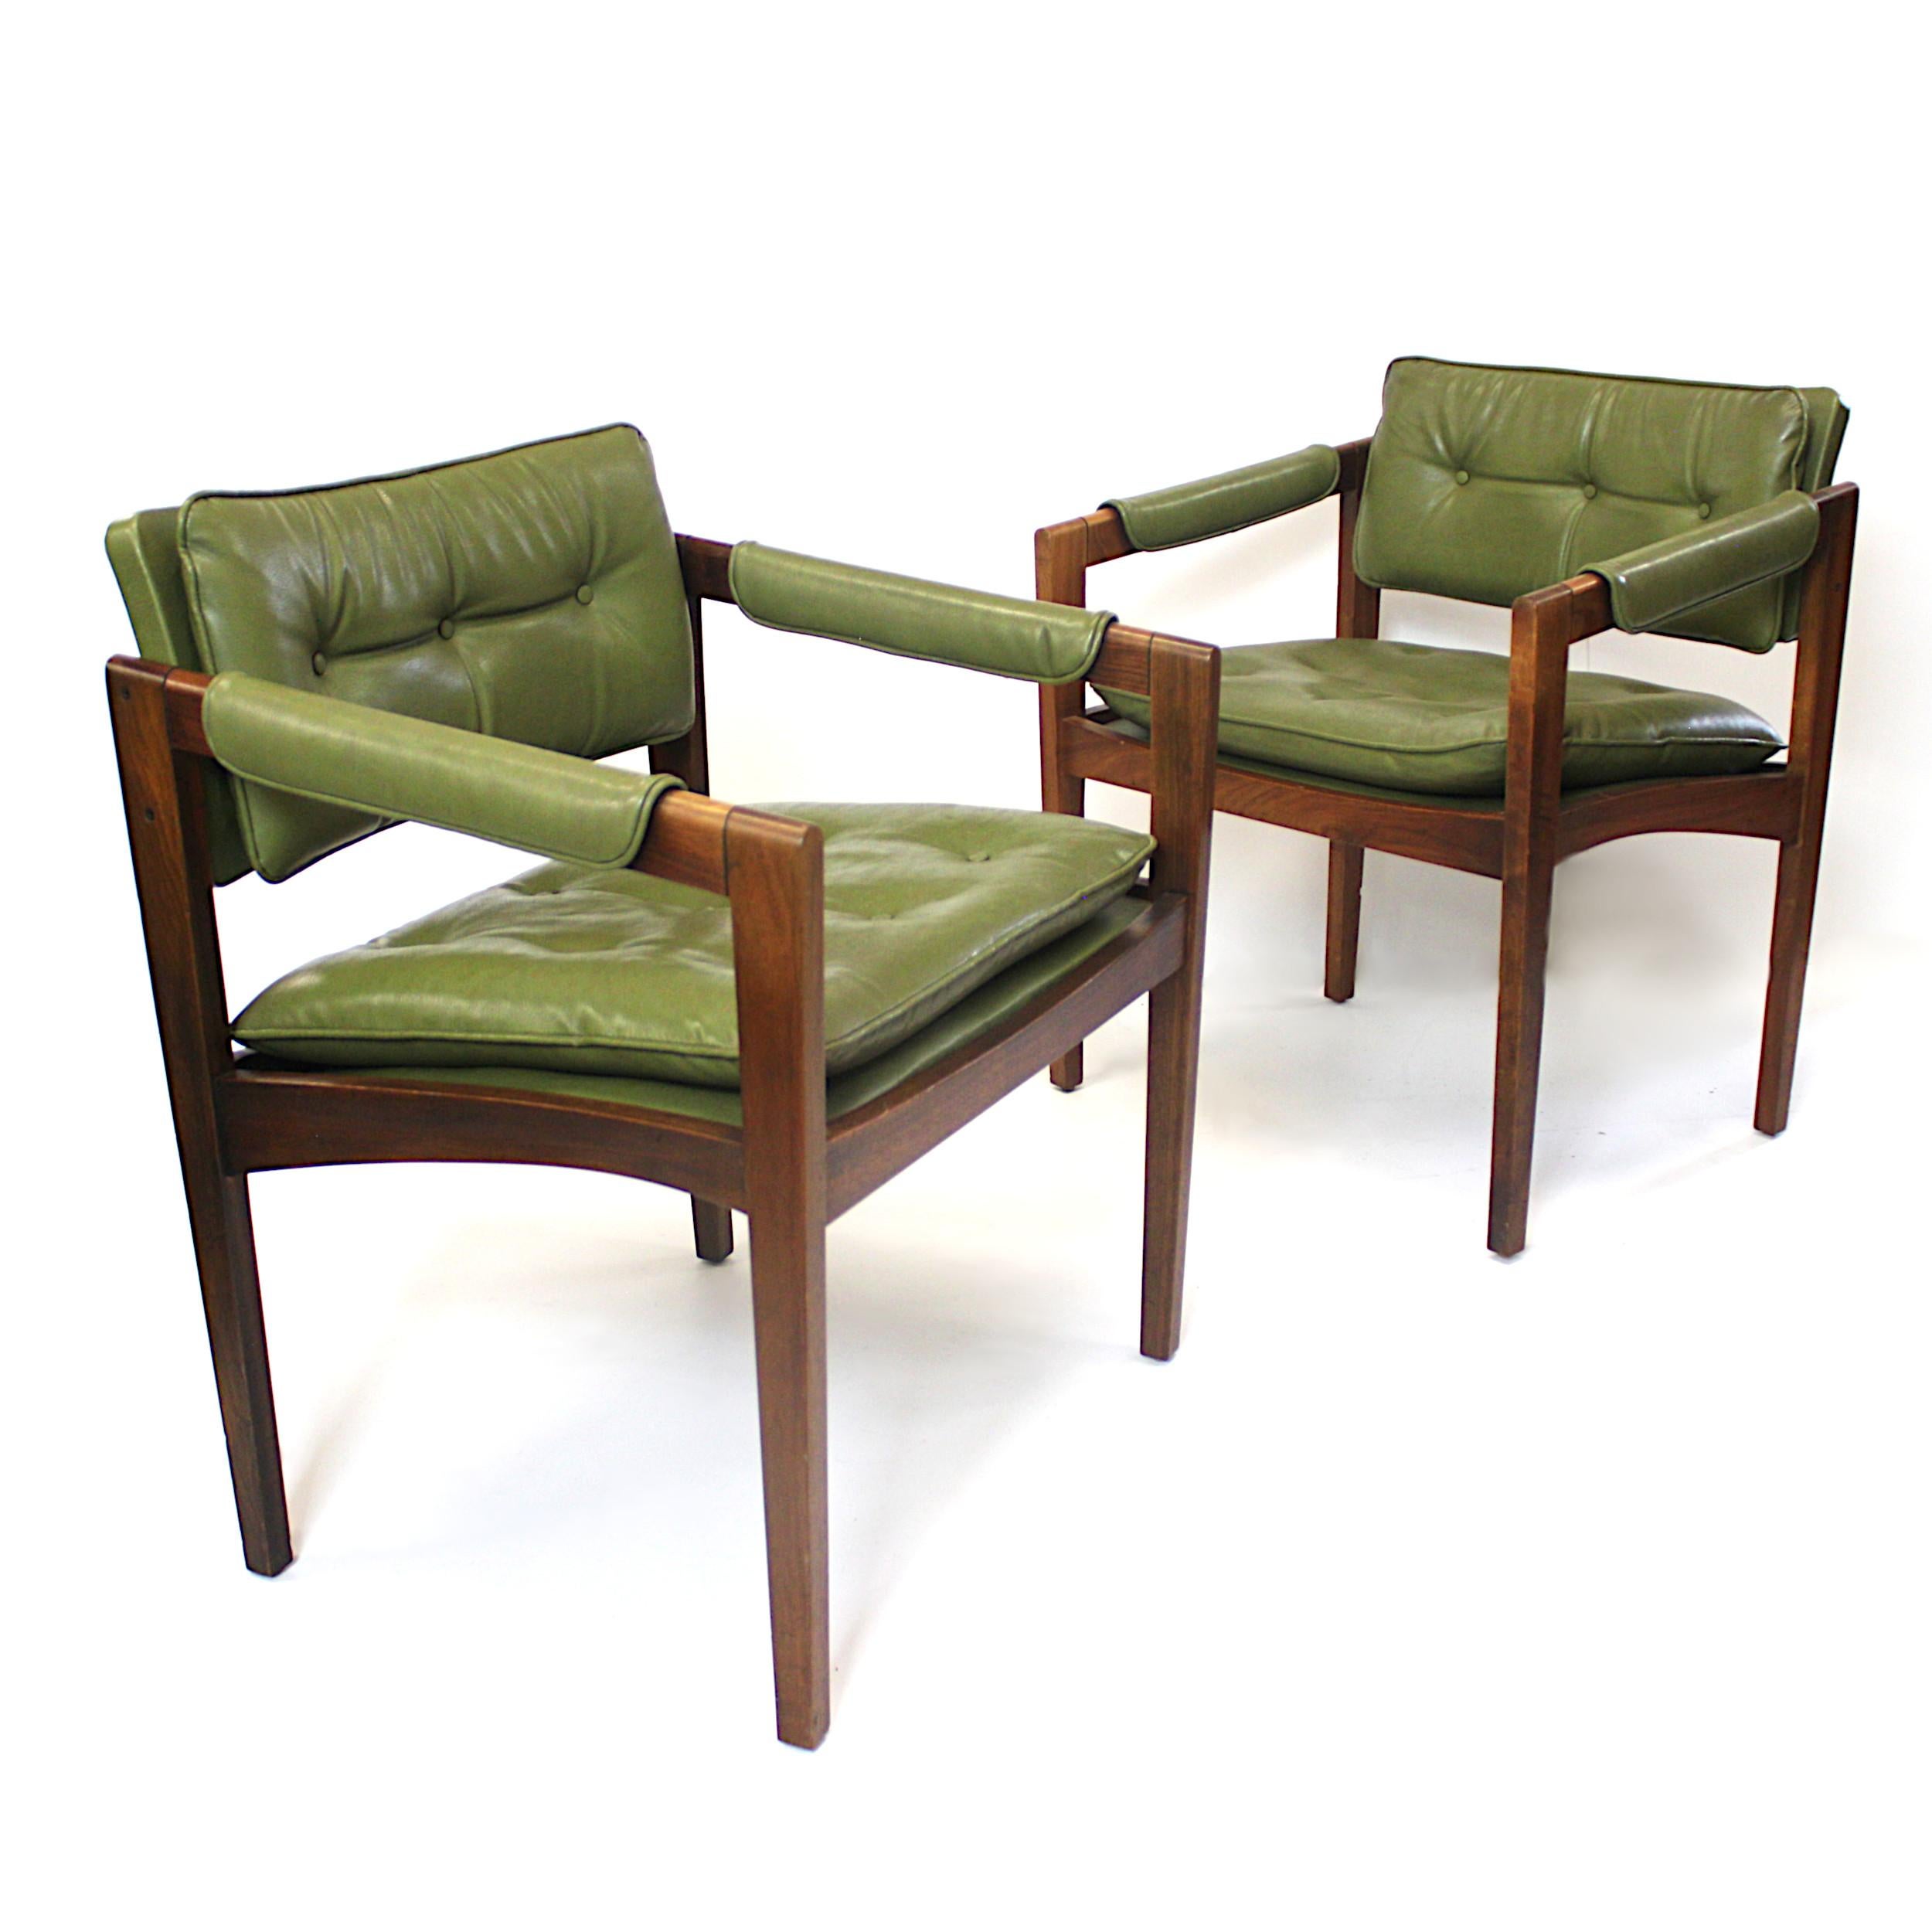 This unusual pair of side chairs by Glenn of California feature beautifully sculpted, solid walnut frames with wonderful tufted green vinyl upholstery. Chairs are in spectacular original condition and even still retain their original dated tag of